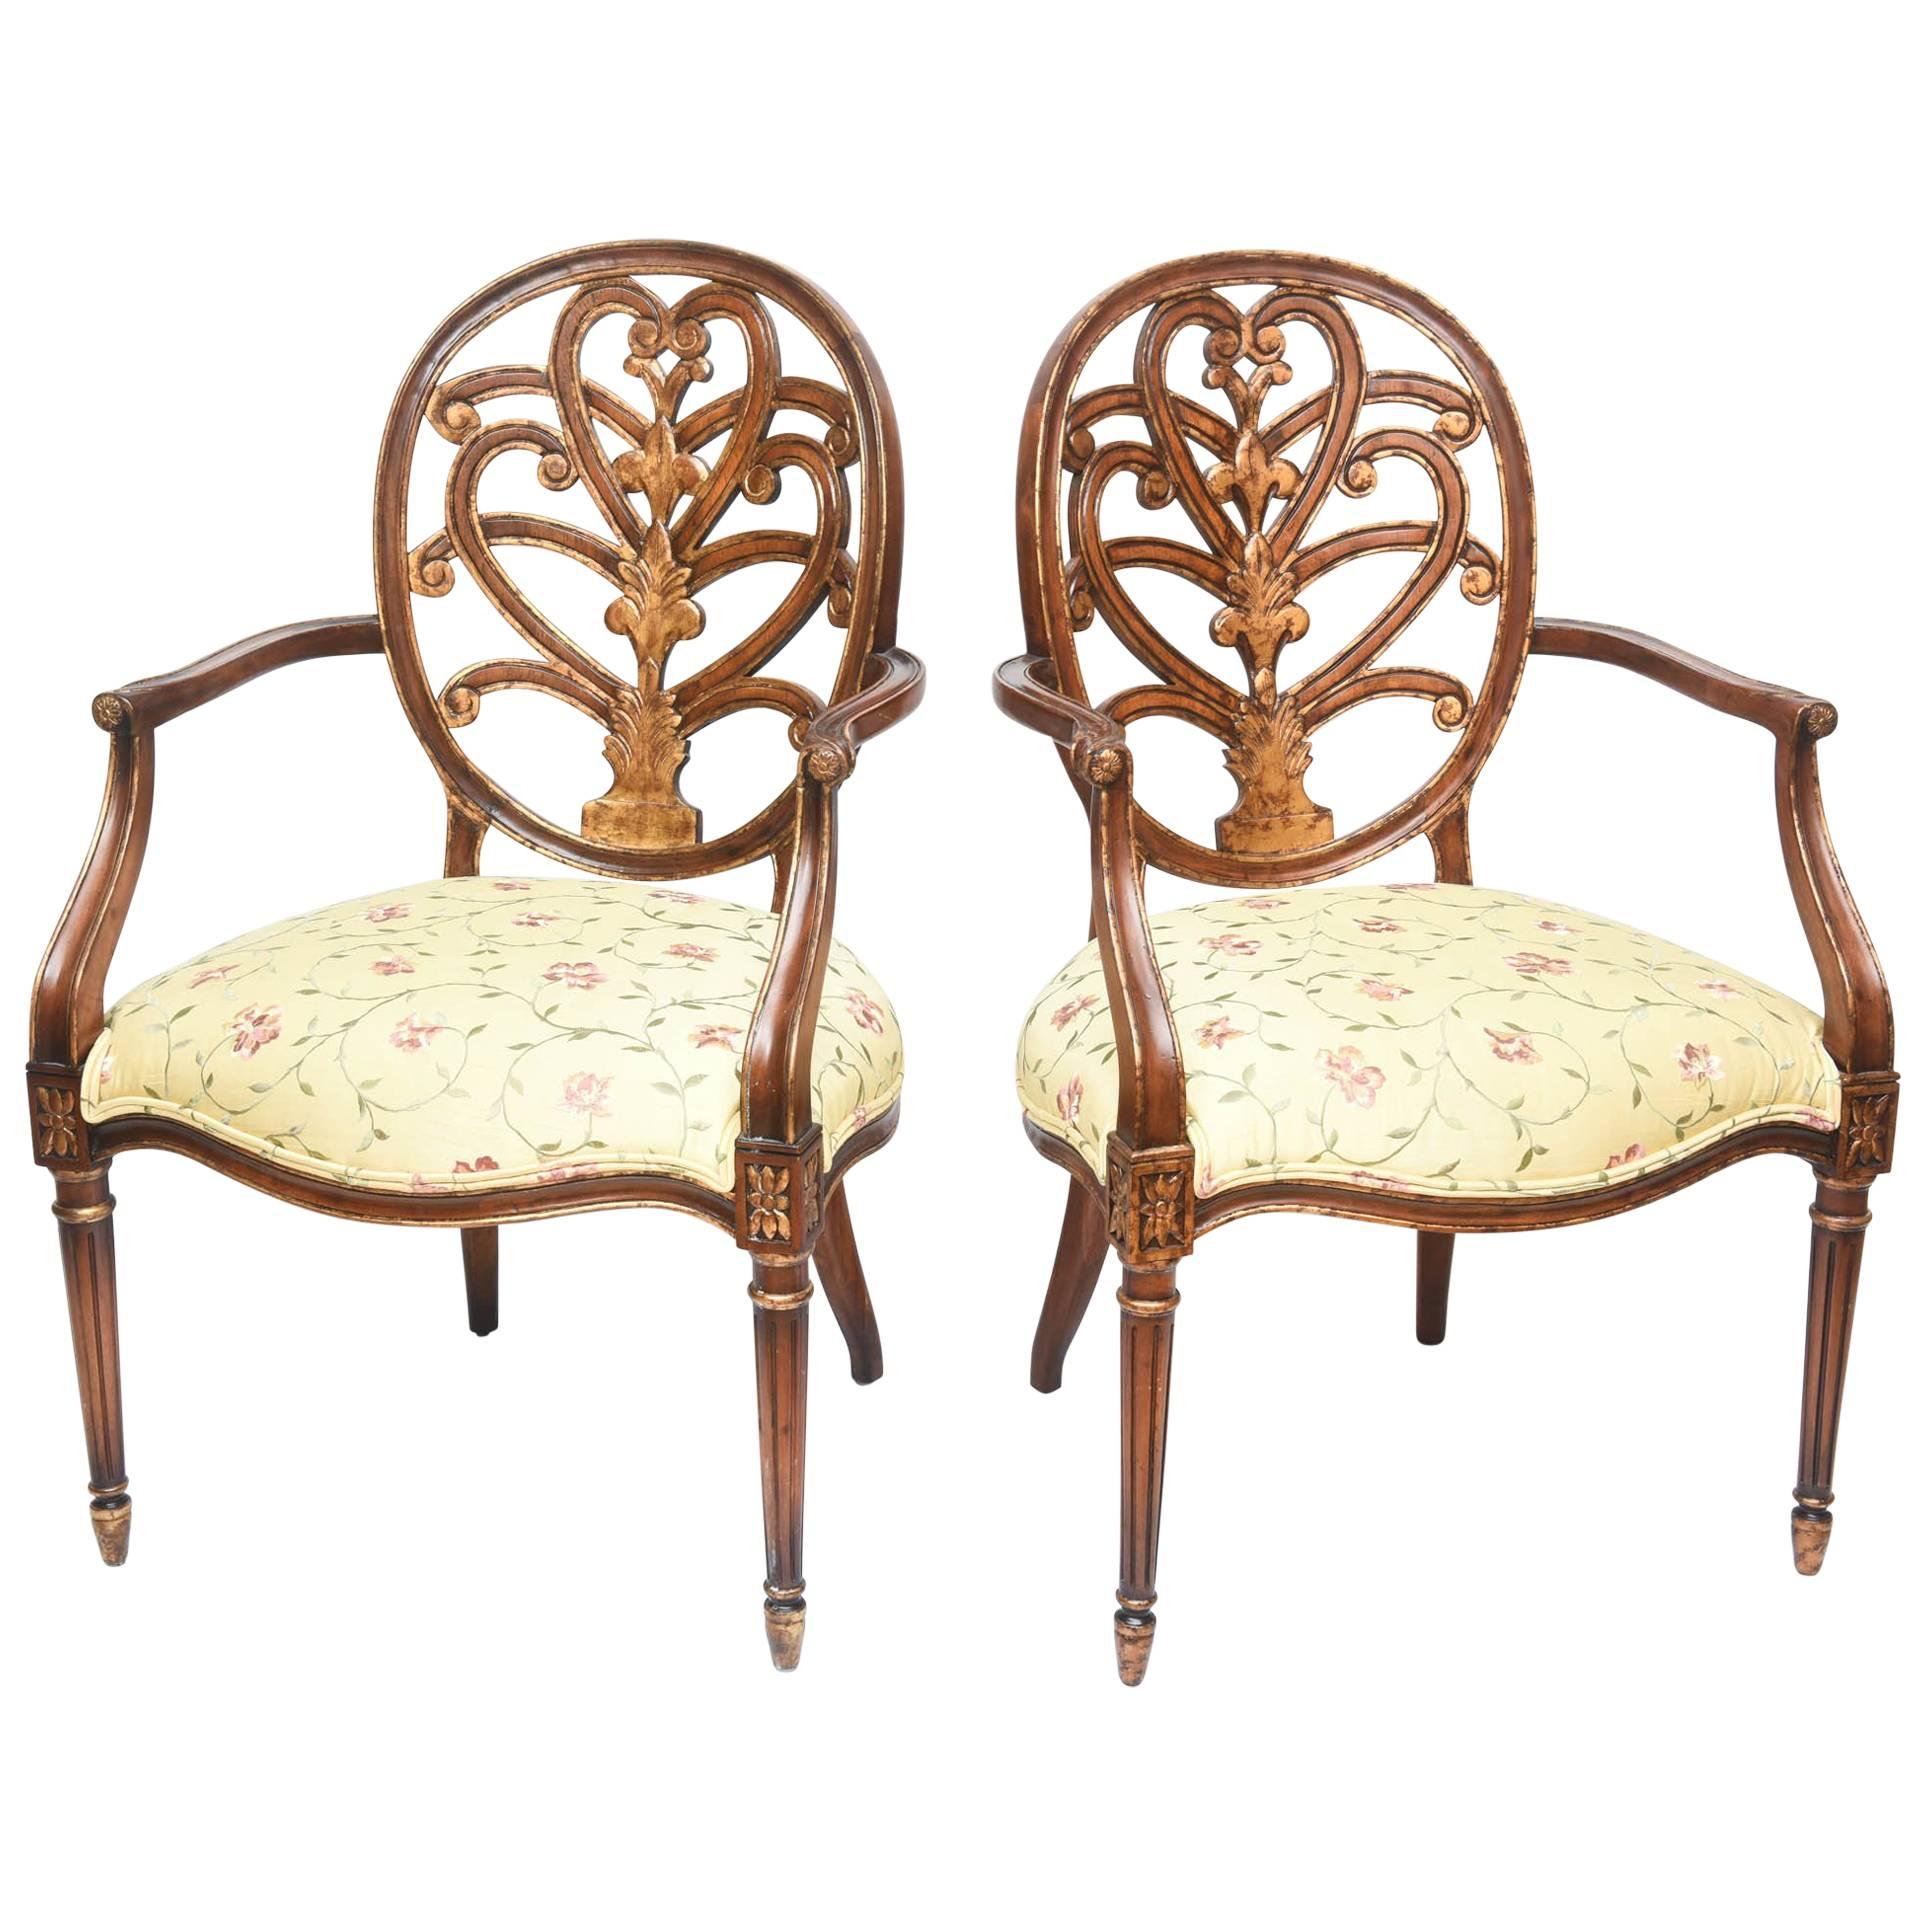 Pair of Carved Mahogany Armchairs, Lovely Decorative Back and Finely Turned Legs